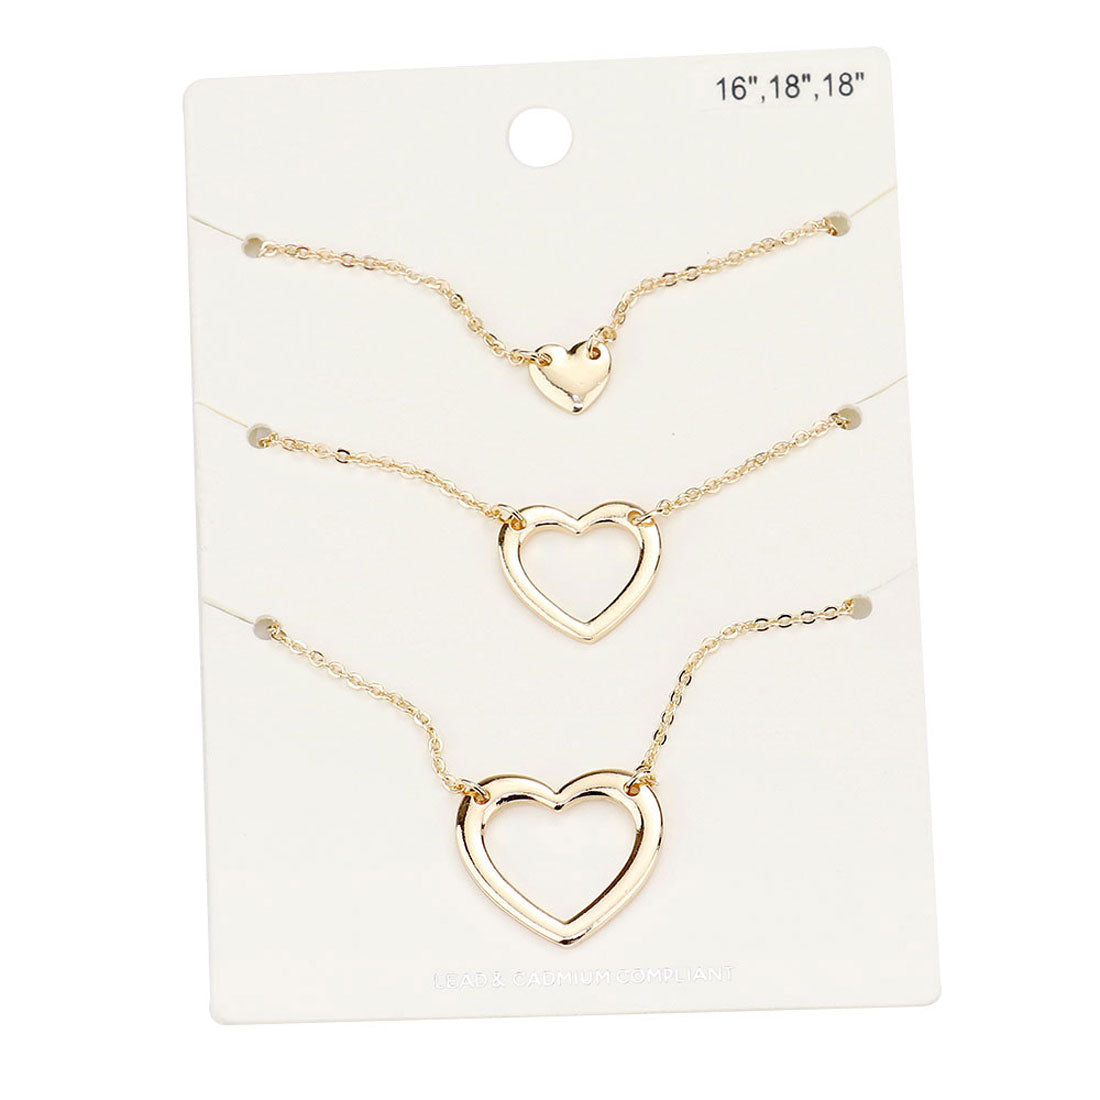 Multi 3PCS - Metal Heart Pendant Necklaces, Get ready with these Pendant Necklace, put on a pop of color to complete your ensemble. Perfect for adding just the right amount of shimmer & shine and a touch of class to special events. Perfect Birthday Gift, Anniversary Gift, Mother's Day Gift, Valentine's Day Gift.